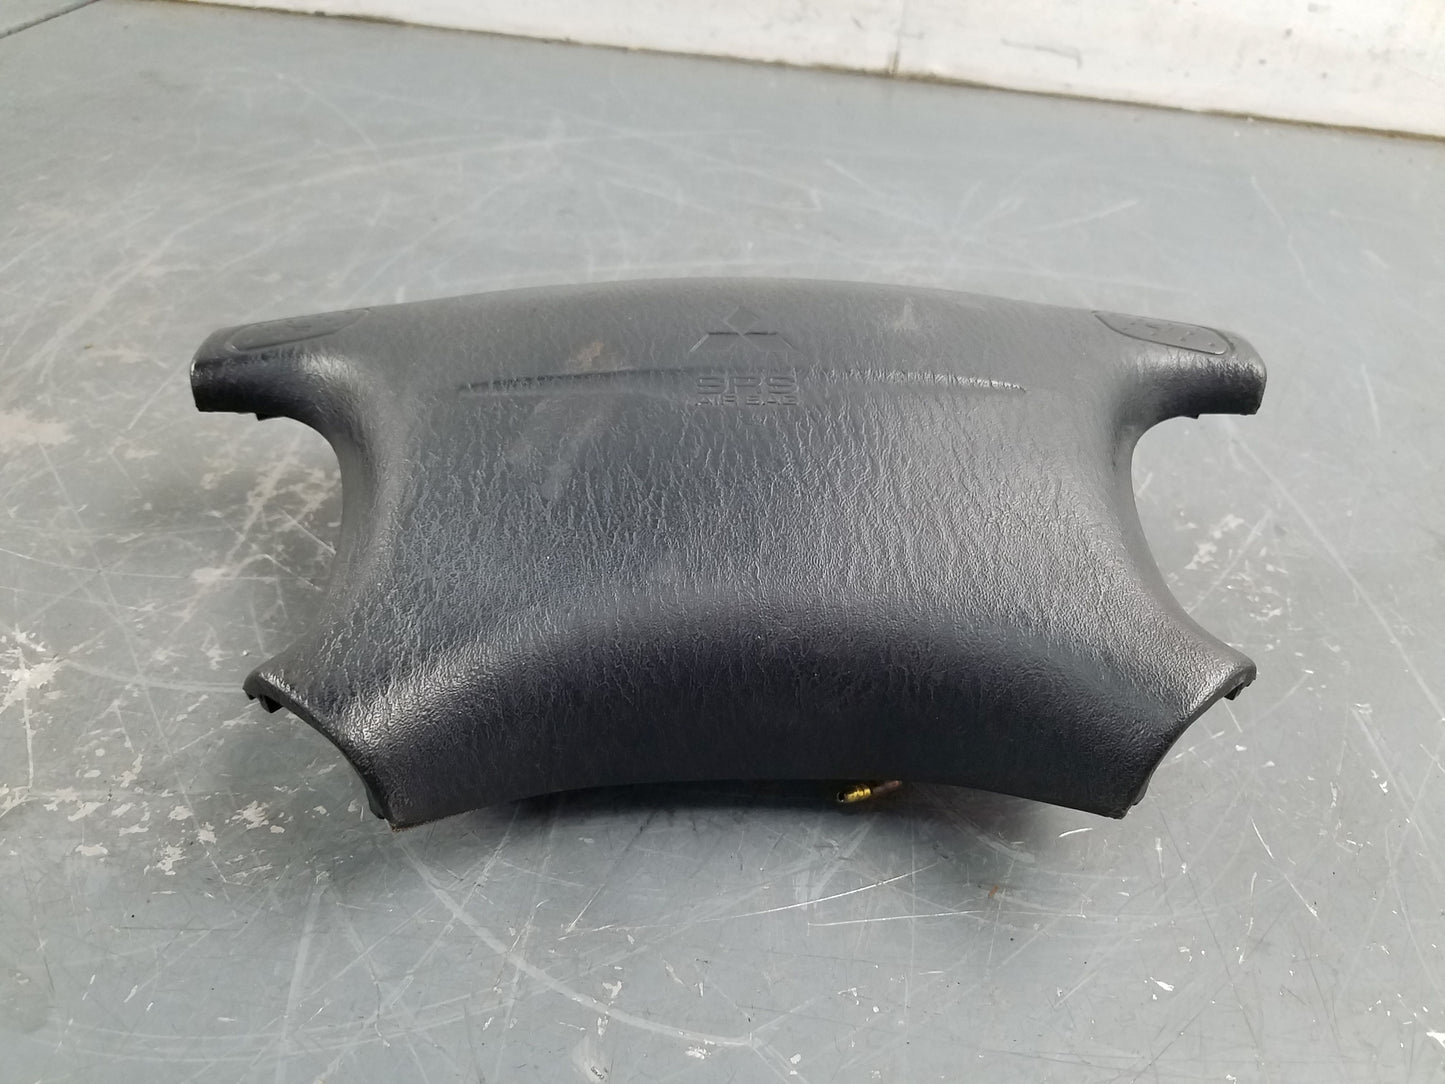 1997 Mitsubishi Eclipse GST GS-T Steering Wheel Airbag #9003 A11